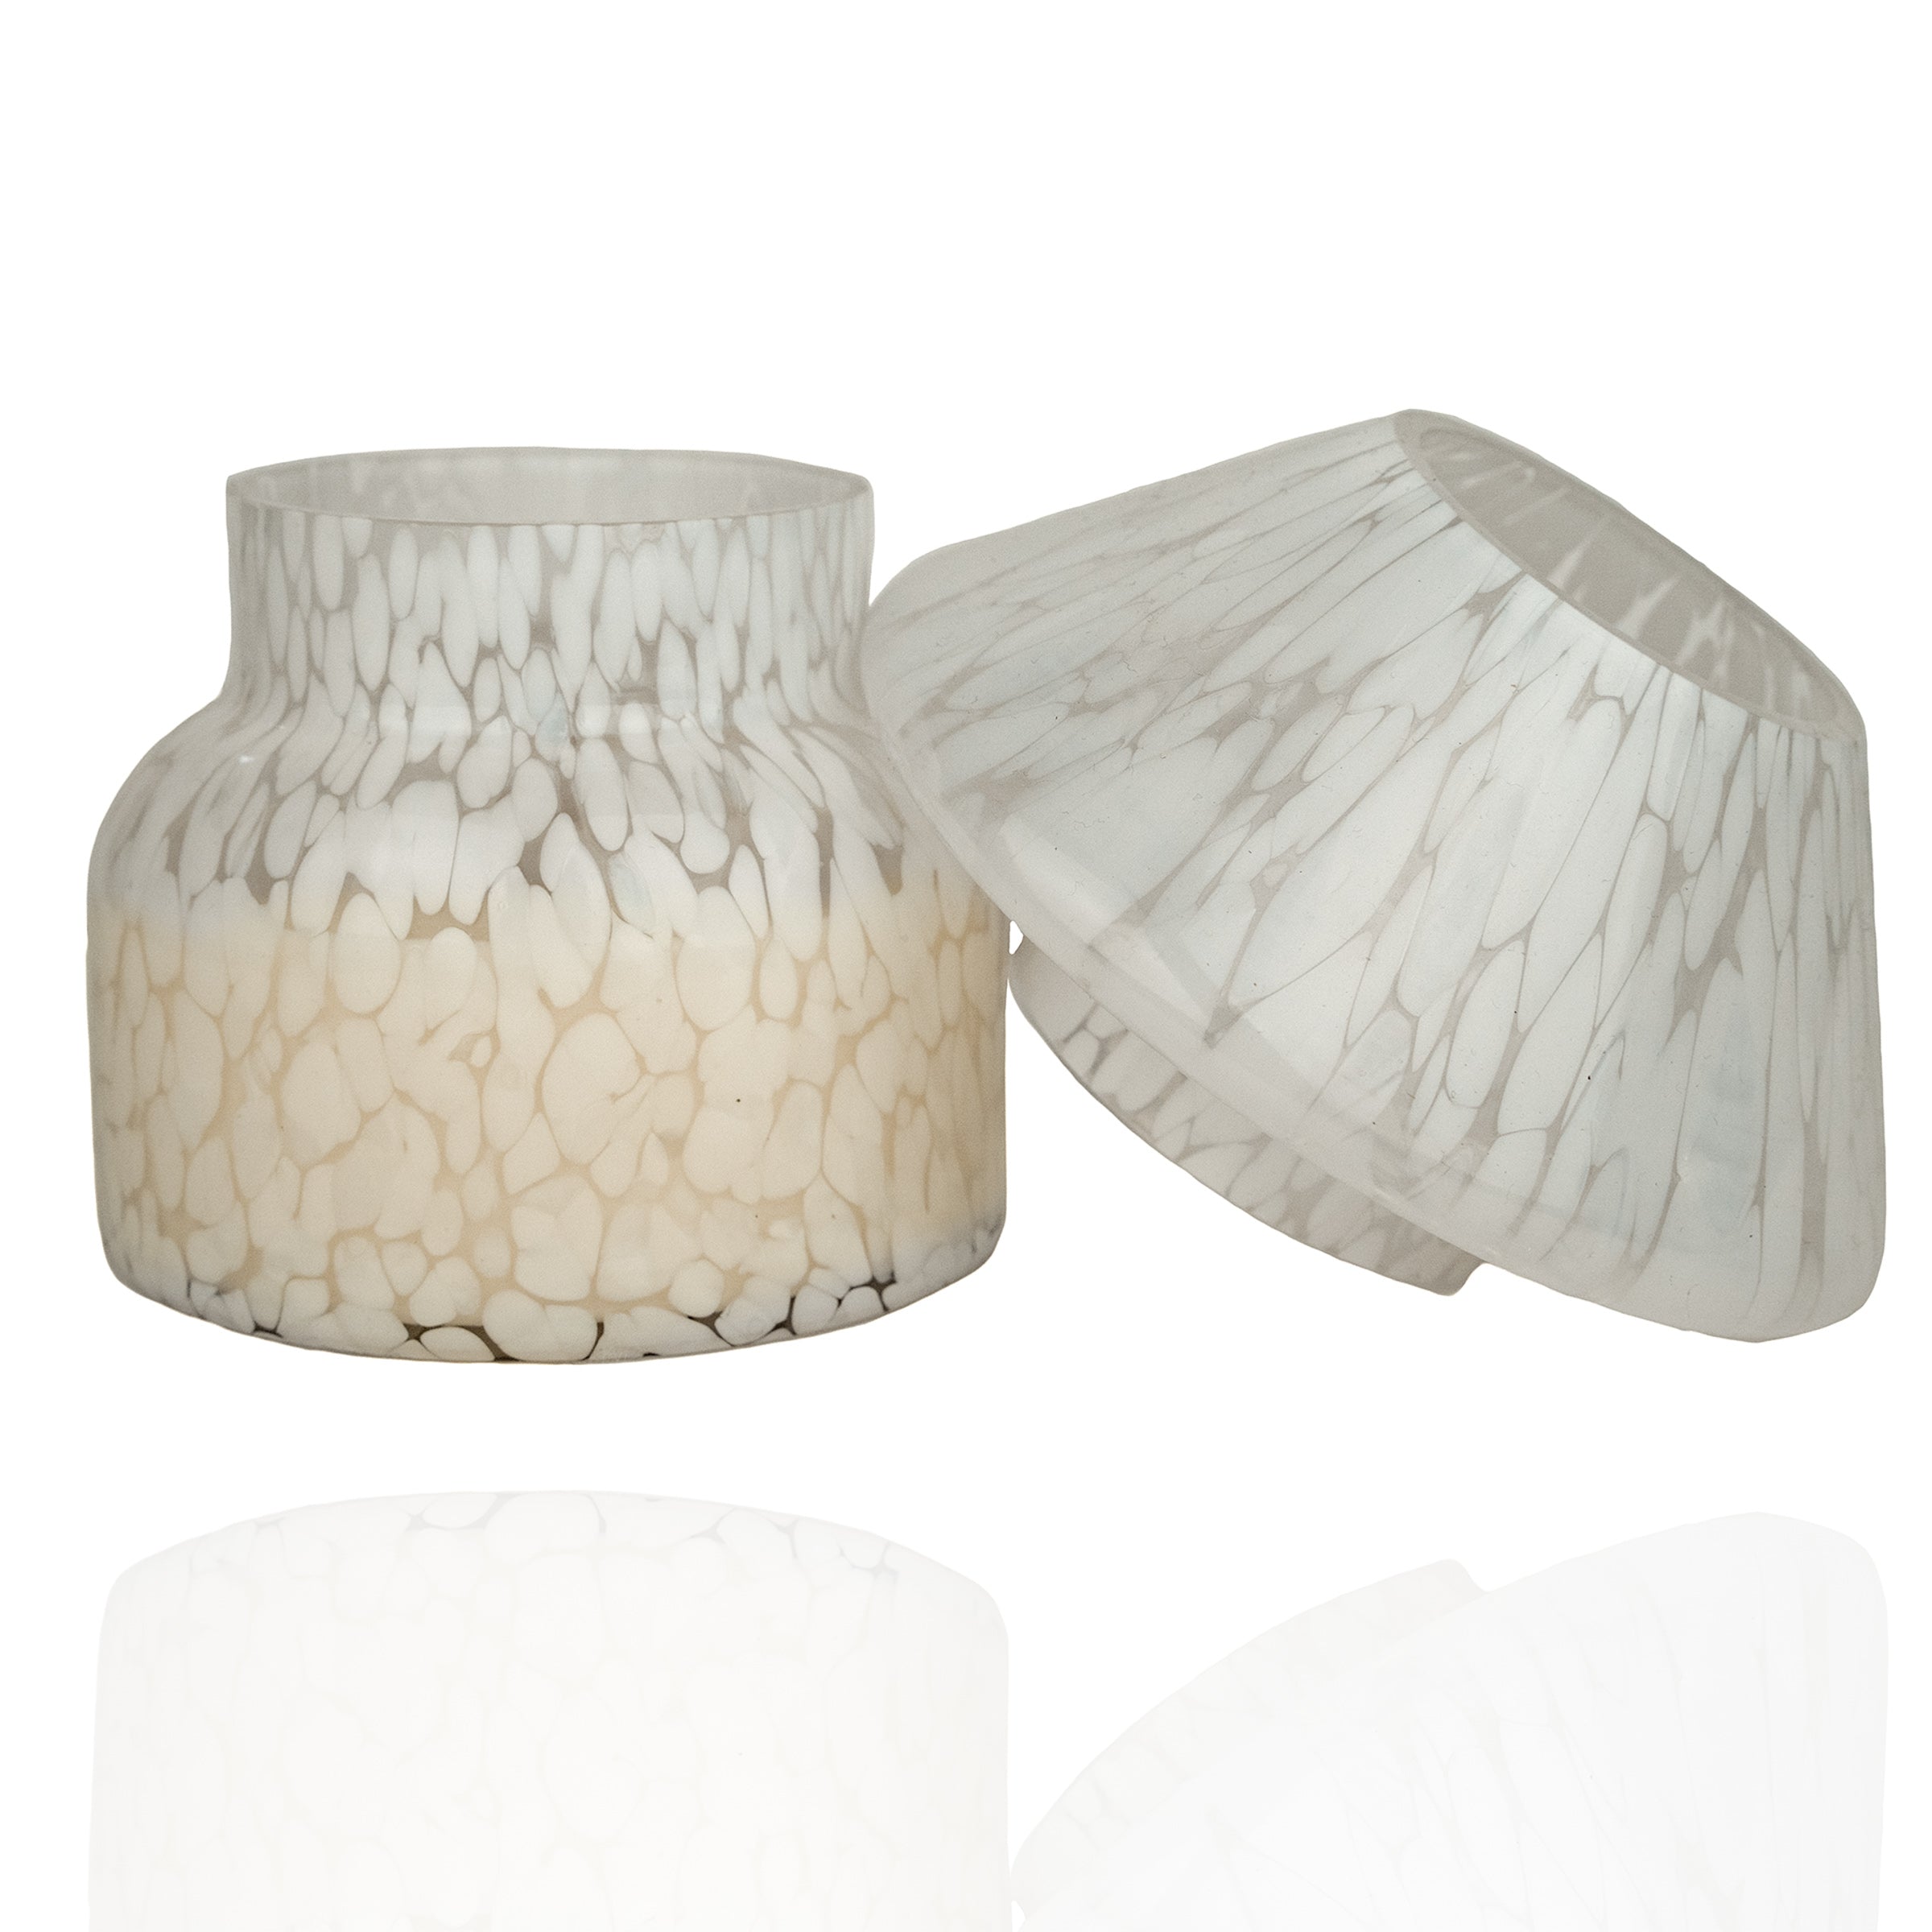 Mushroom candle lamp with white spots on clear glass and lid ajar. Filled with 100% soy wax.